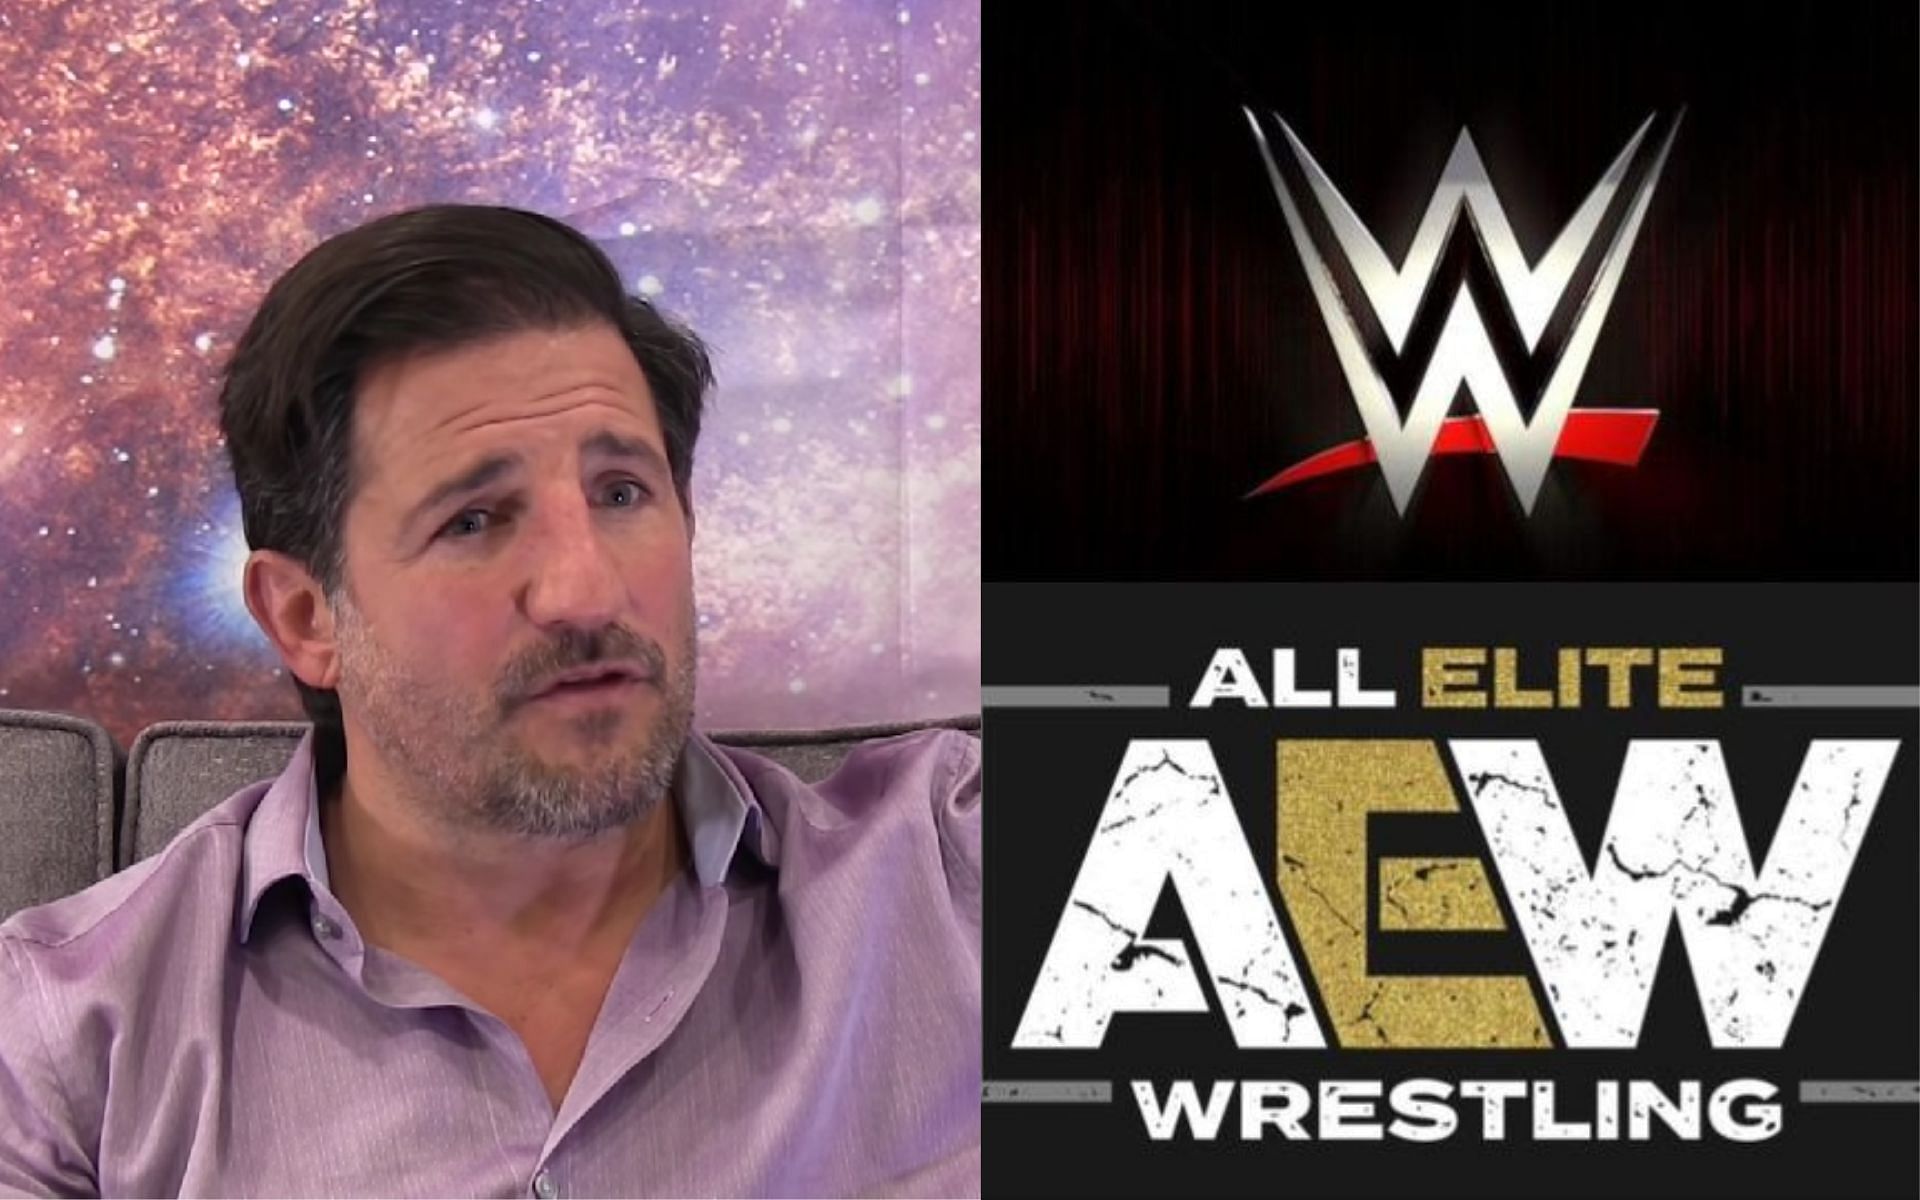 Disco Inferno thinks these current AEW champions should go back to WWE